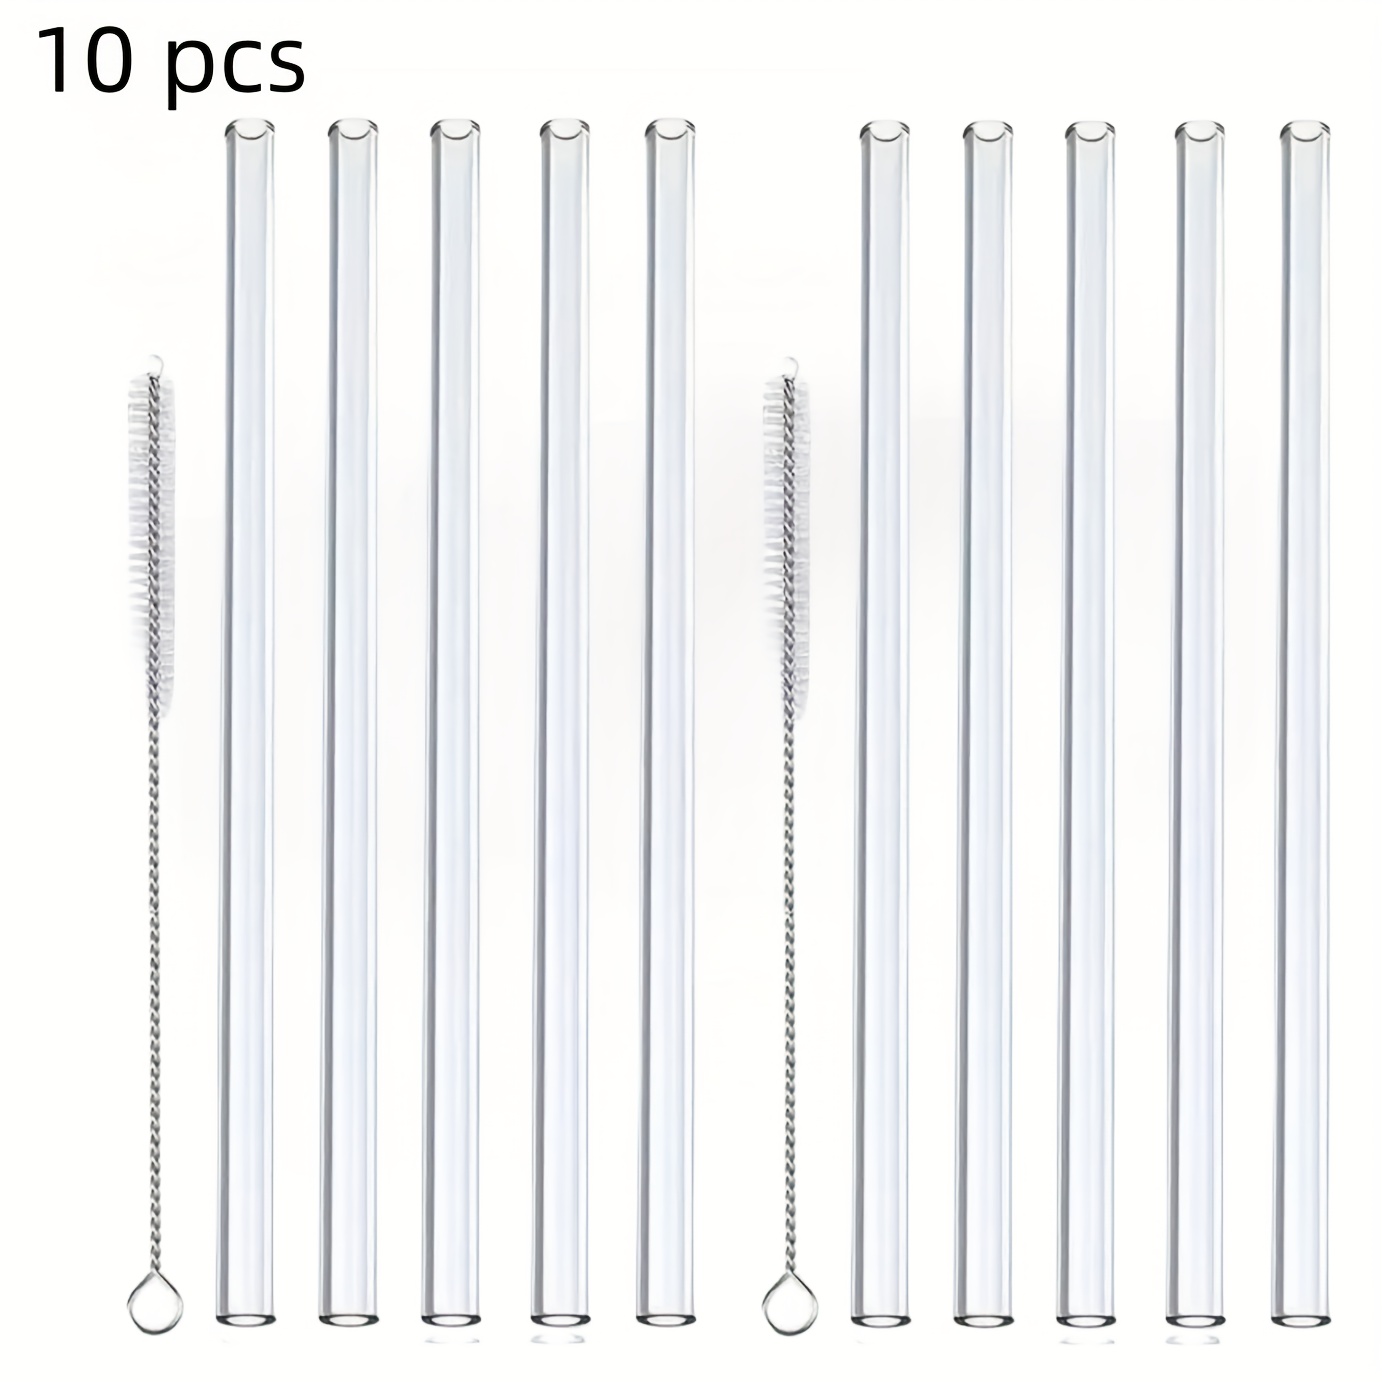 6pcs, Replacement Straws For Stanley Cup Accessories, Reusable Metal Straws  Compatible With 40 Oz Tumbler, 12''x 8 MM Extra Long Straws With Cleaning